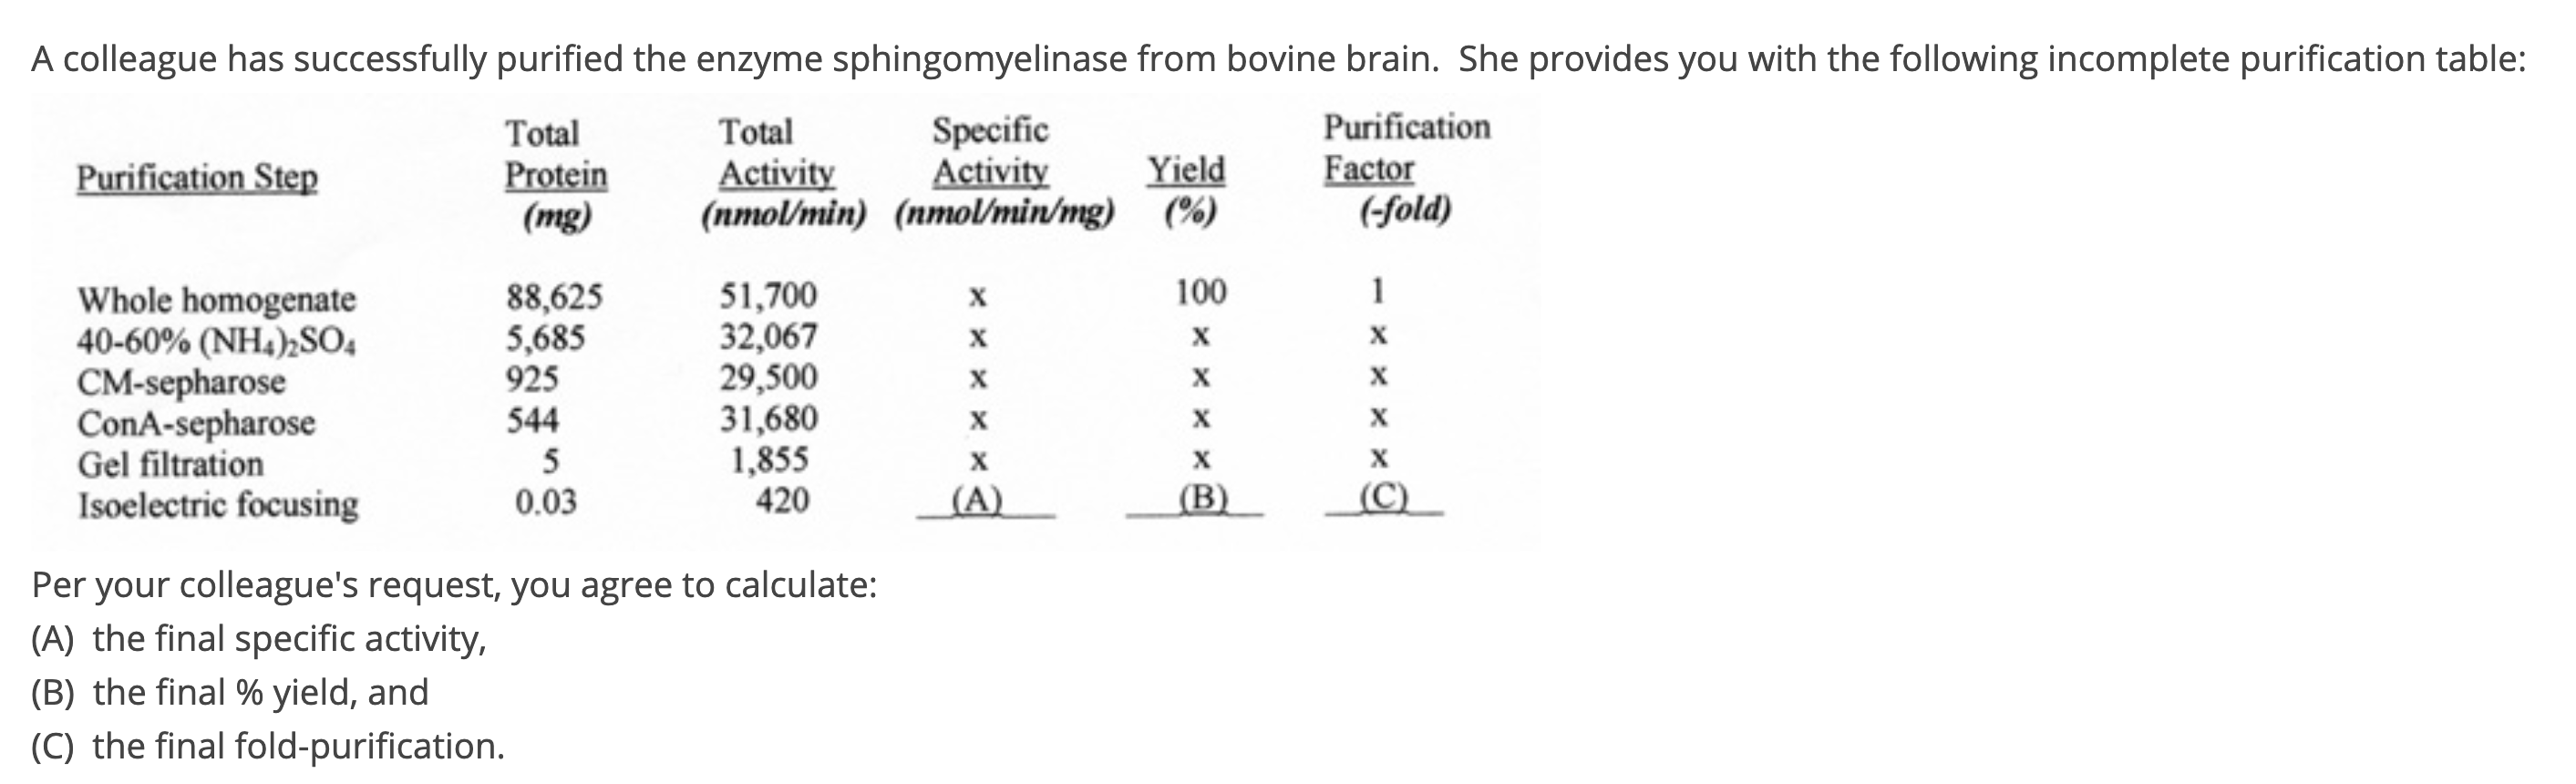 A colleague has successfully purified the enzyme sphingomyelinase from bovine brain. She provides you with the following incomplete purification table:
Specific
Activity
(nmol/min) (nmol/min/mg) (%)
Purification
Factor
(-fold)
Total
Total
Purification Step
Activity
Yield
Protein
(mg)
100
1
Whole homogenate
40-60% (NH4);SO4
CM-sepharose
ConA-sepharose
Gel filtration
Isoelectric focusing
88,625
5,685
925
544
51,700
32,067
29,500
31,680
1,855
420
5
0.03
(A)
(B)
(C)
Per your colleague's request, you agree to calculate:
(A) the final specific activity,
(B) the final % yield, and
(C) the final fold-purification.
- x x x x
*xx x x
